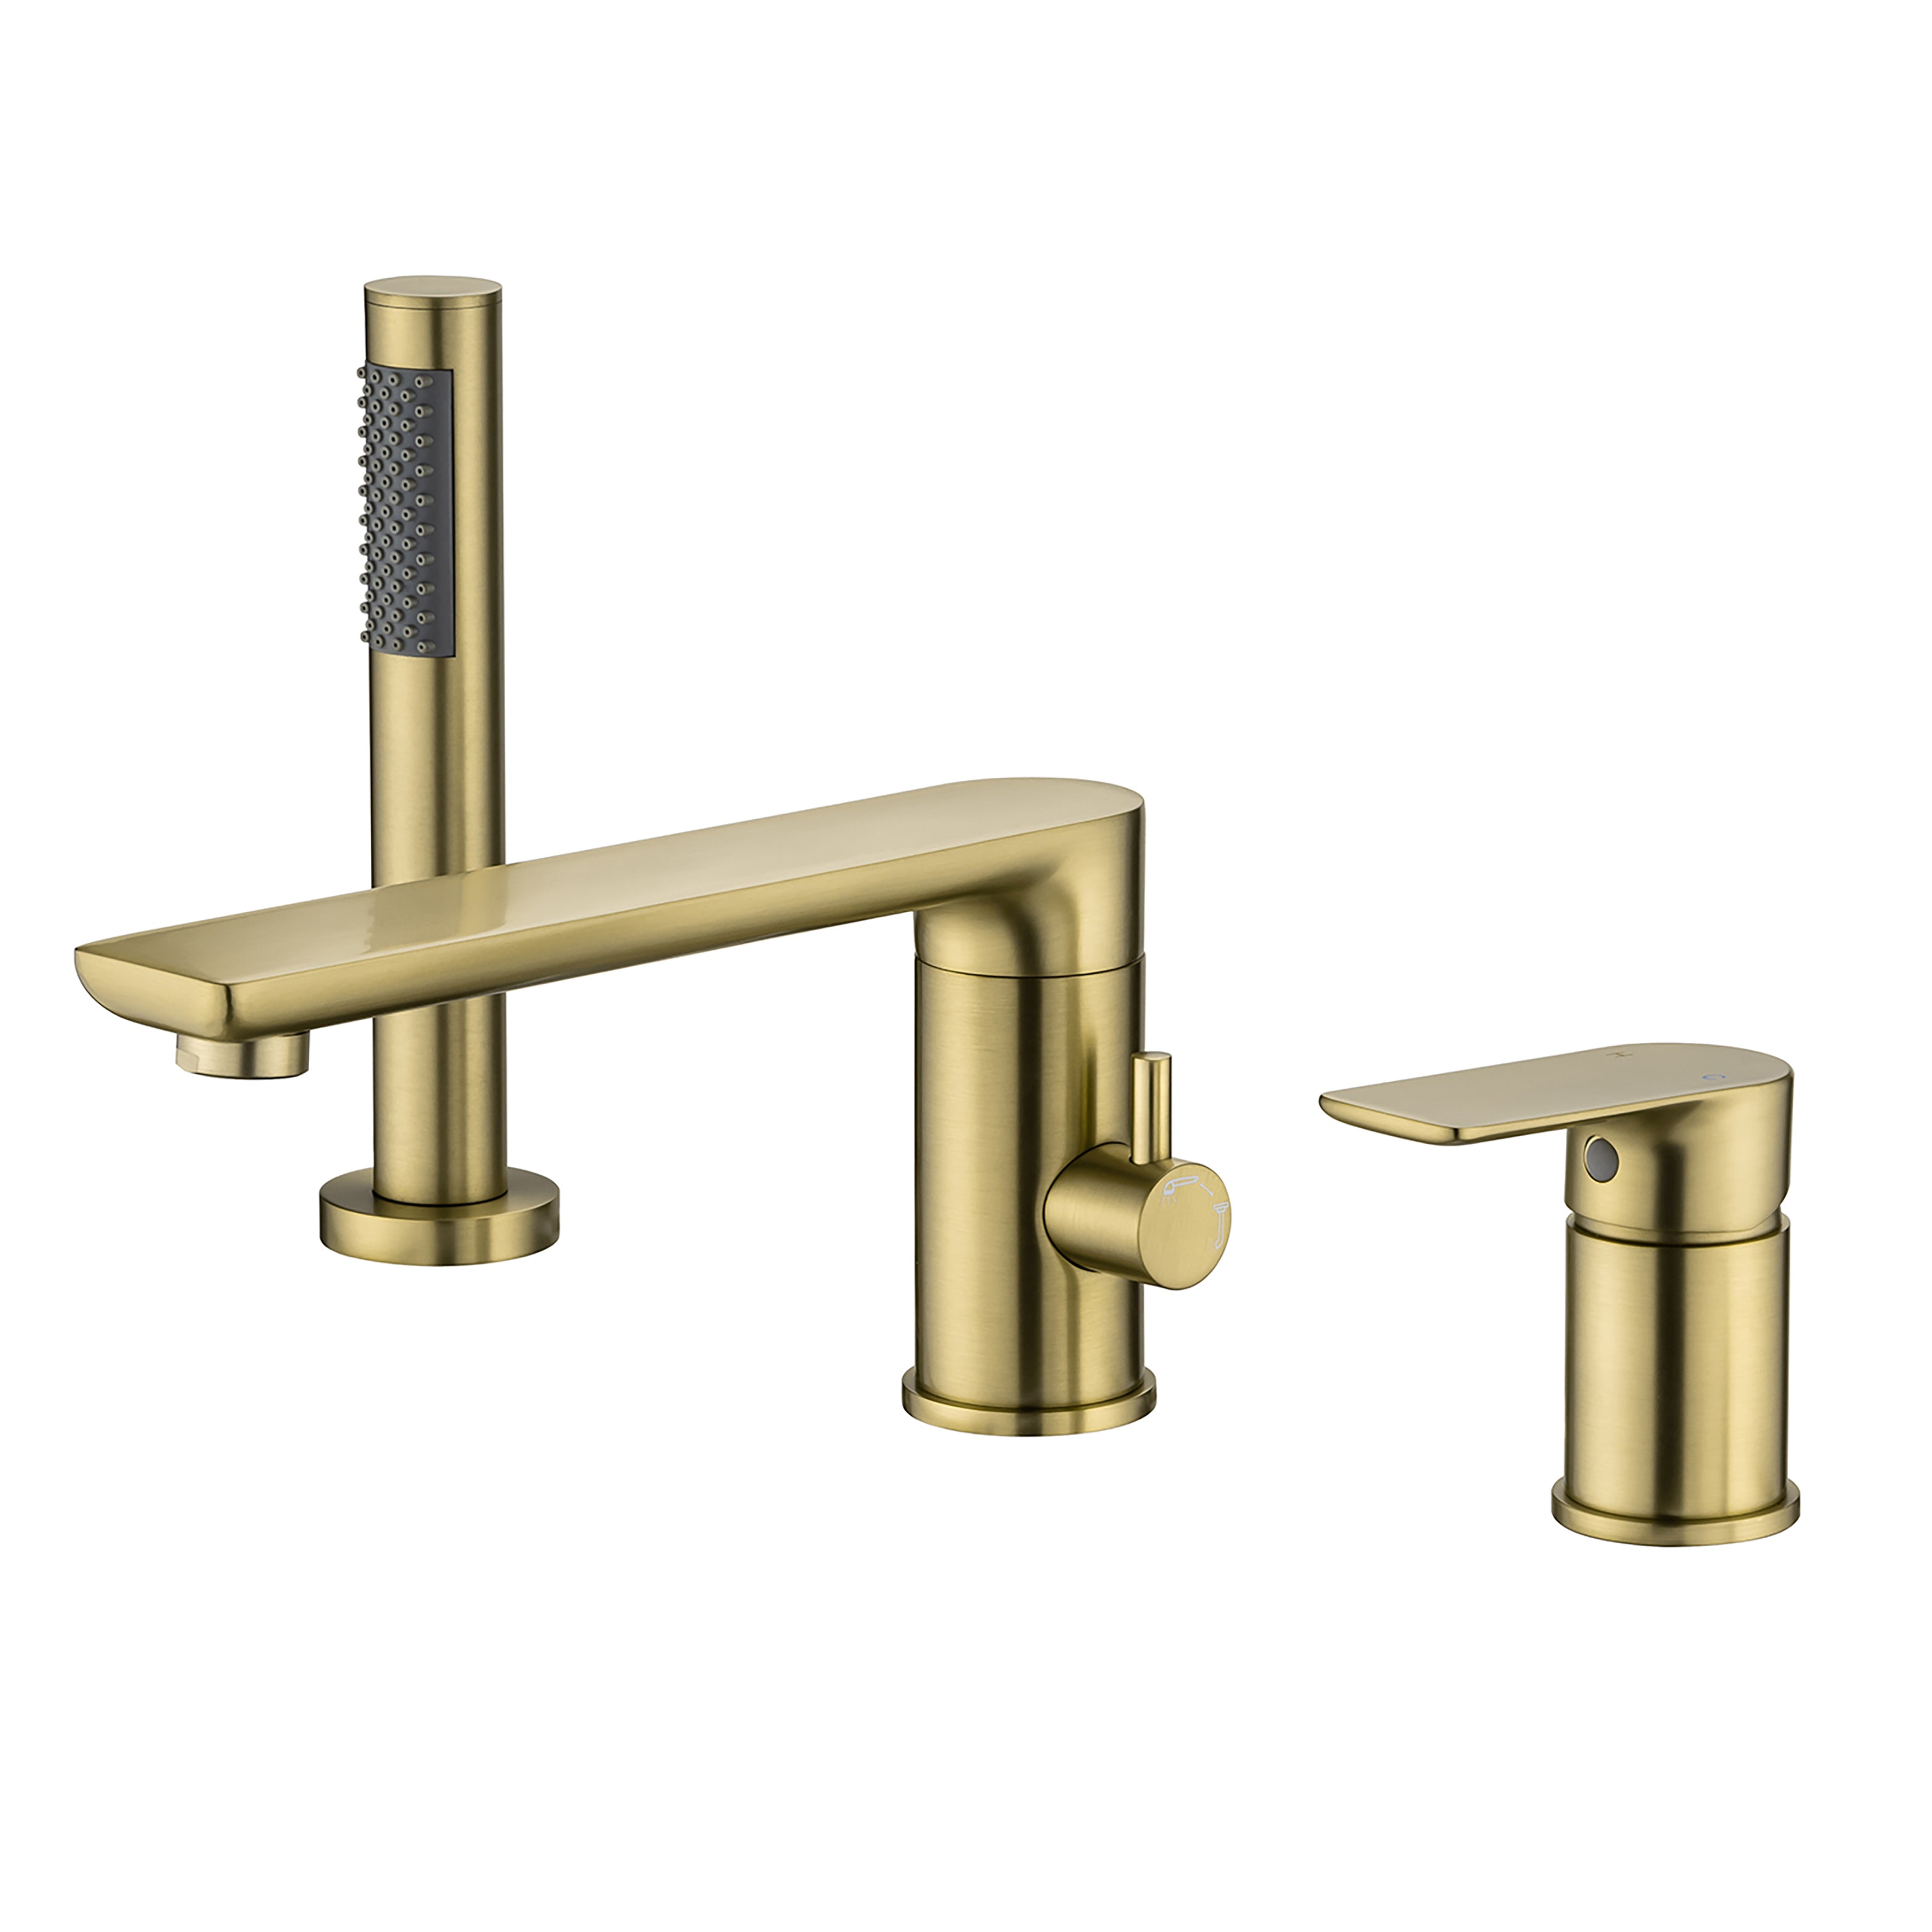 Deck Mounted Single-Handle Roman Tub Faucet with Diverter and Handheld shower RX8012